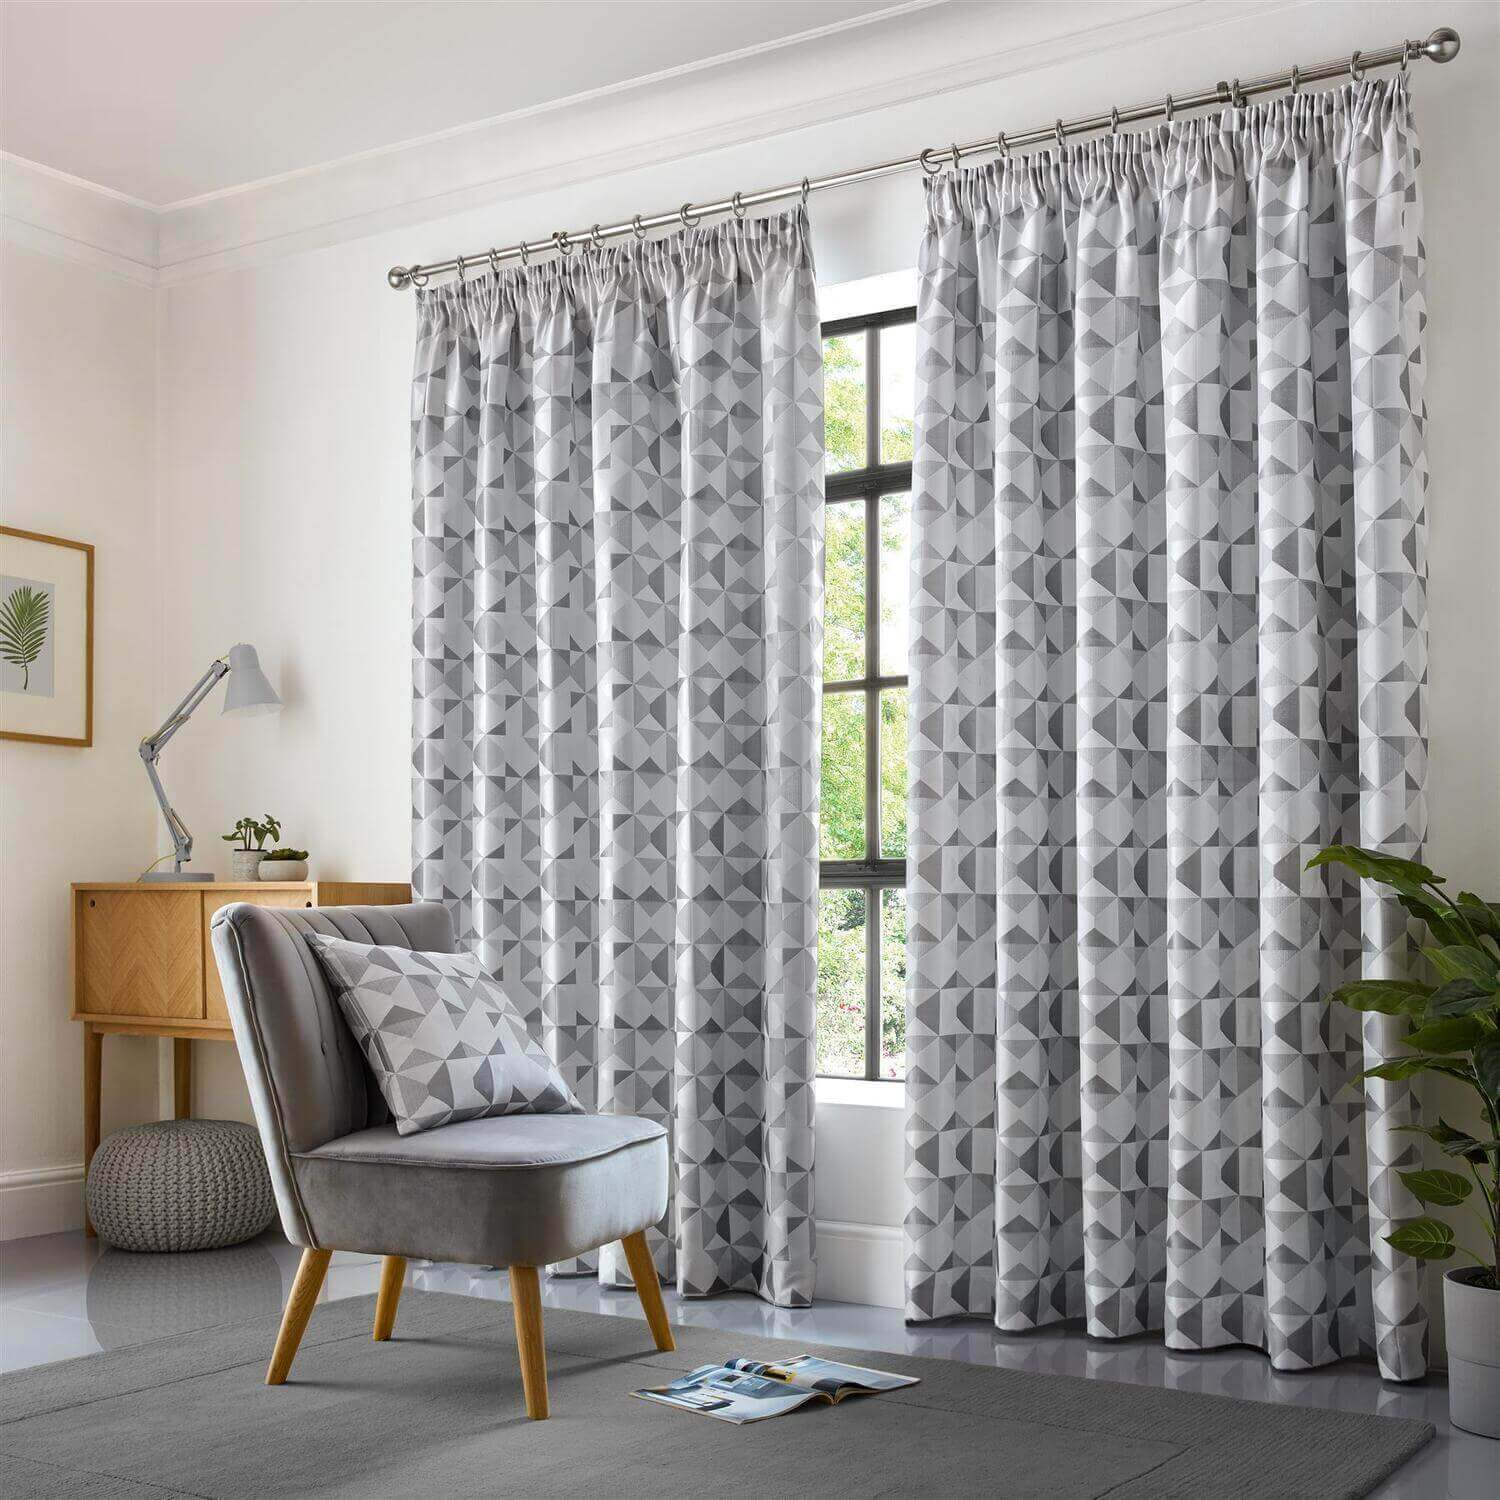 Quick Tips – Choosing Window Treatments That Perform In Our Climate